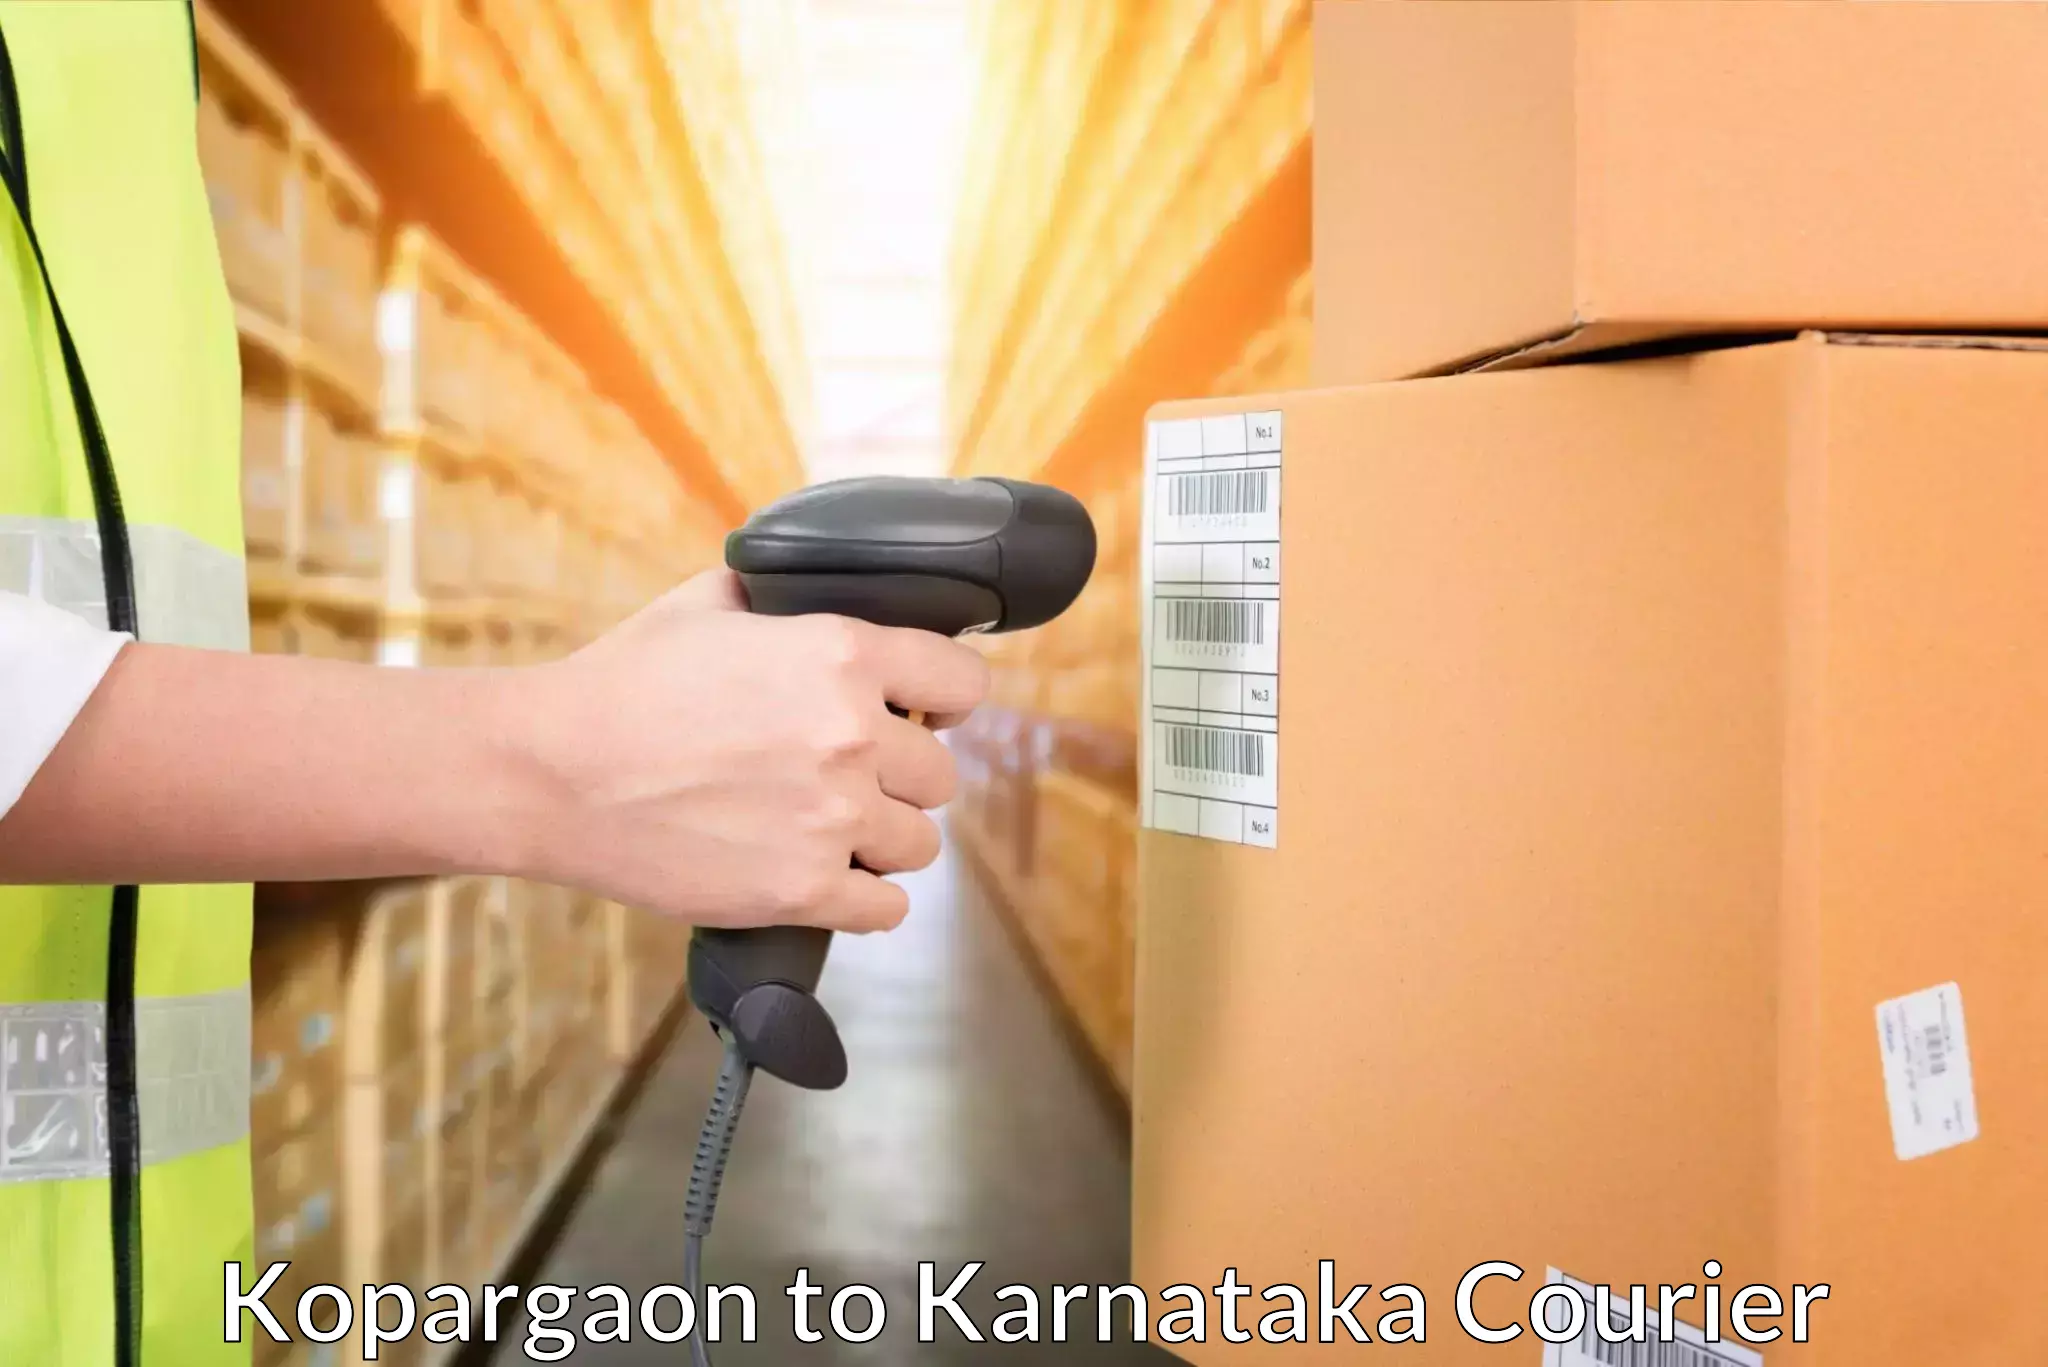 Full-service courier options in Kopargaon to Ankola